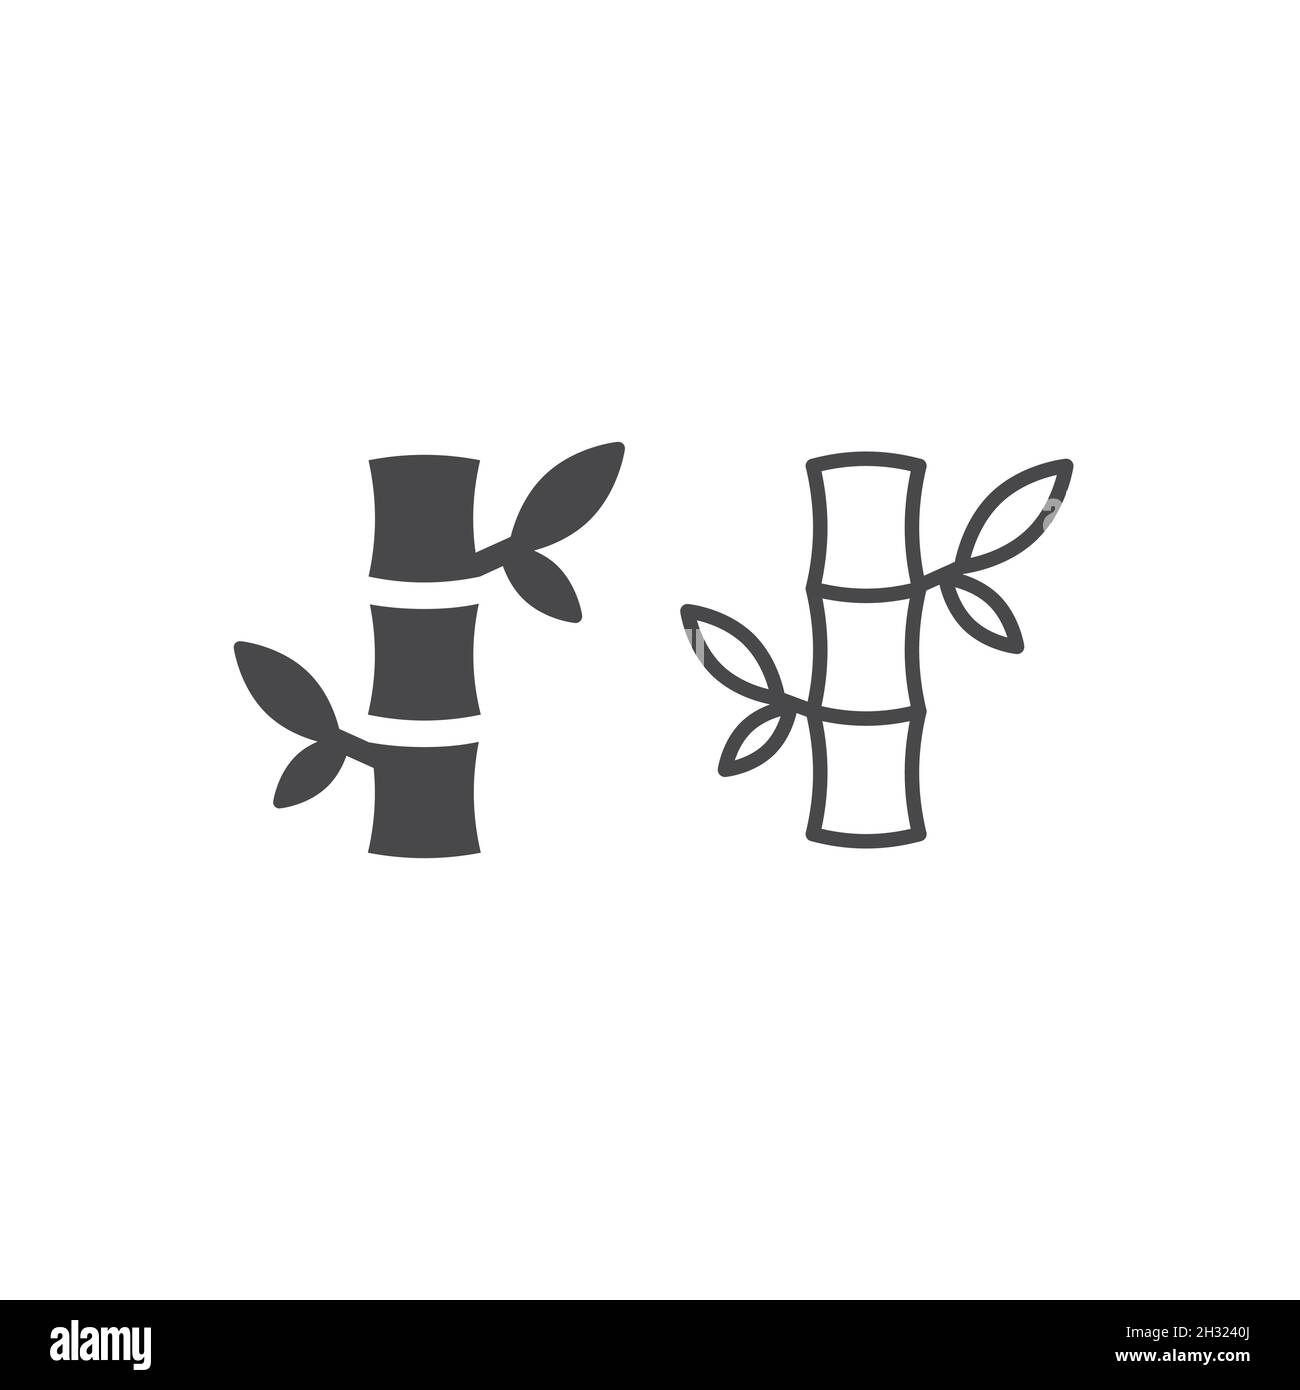 Bamboo line and glyph black vector icon. Simple bamboo with leaves symbol. Stock Vector